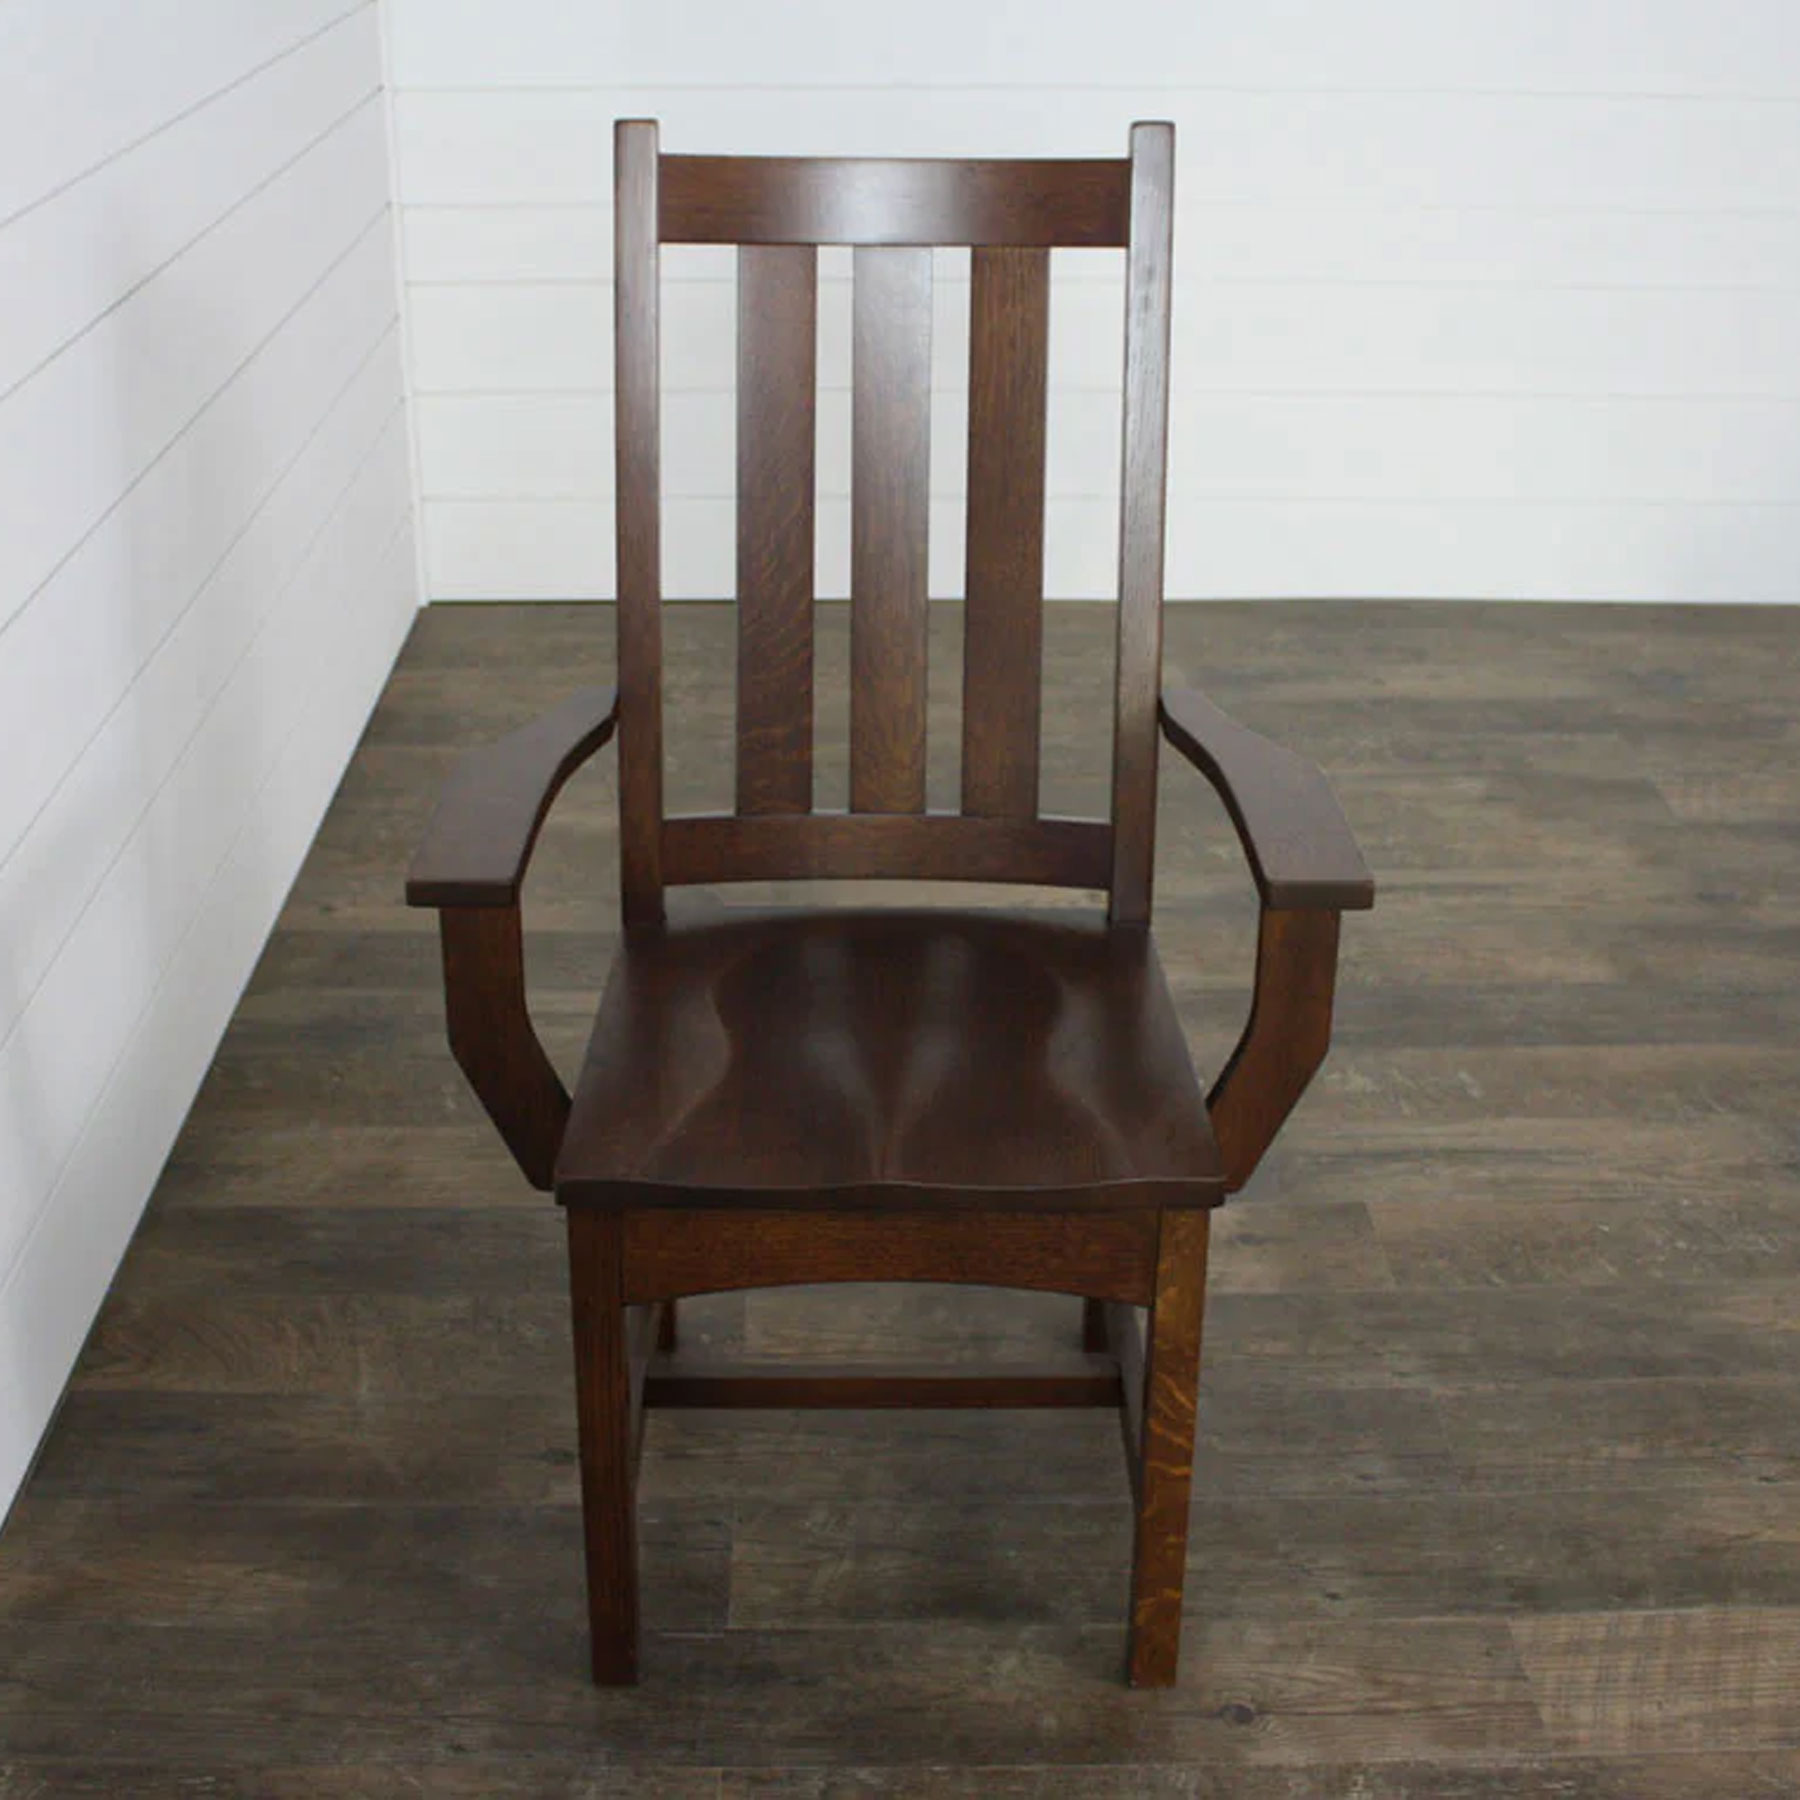 Craftsman Arm Chair with Wood Seat in Quartersawn White Oak